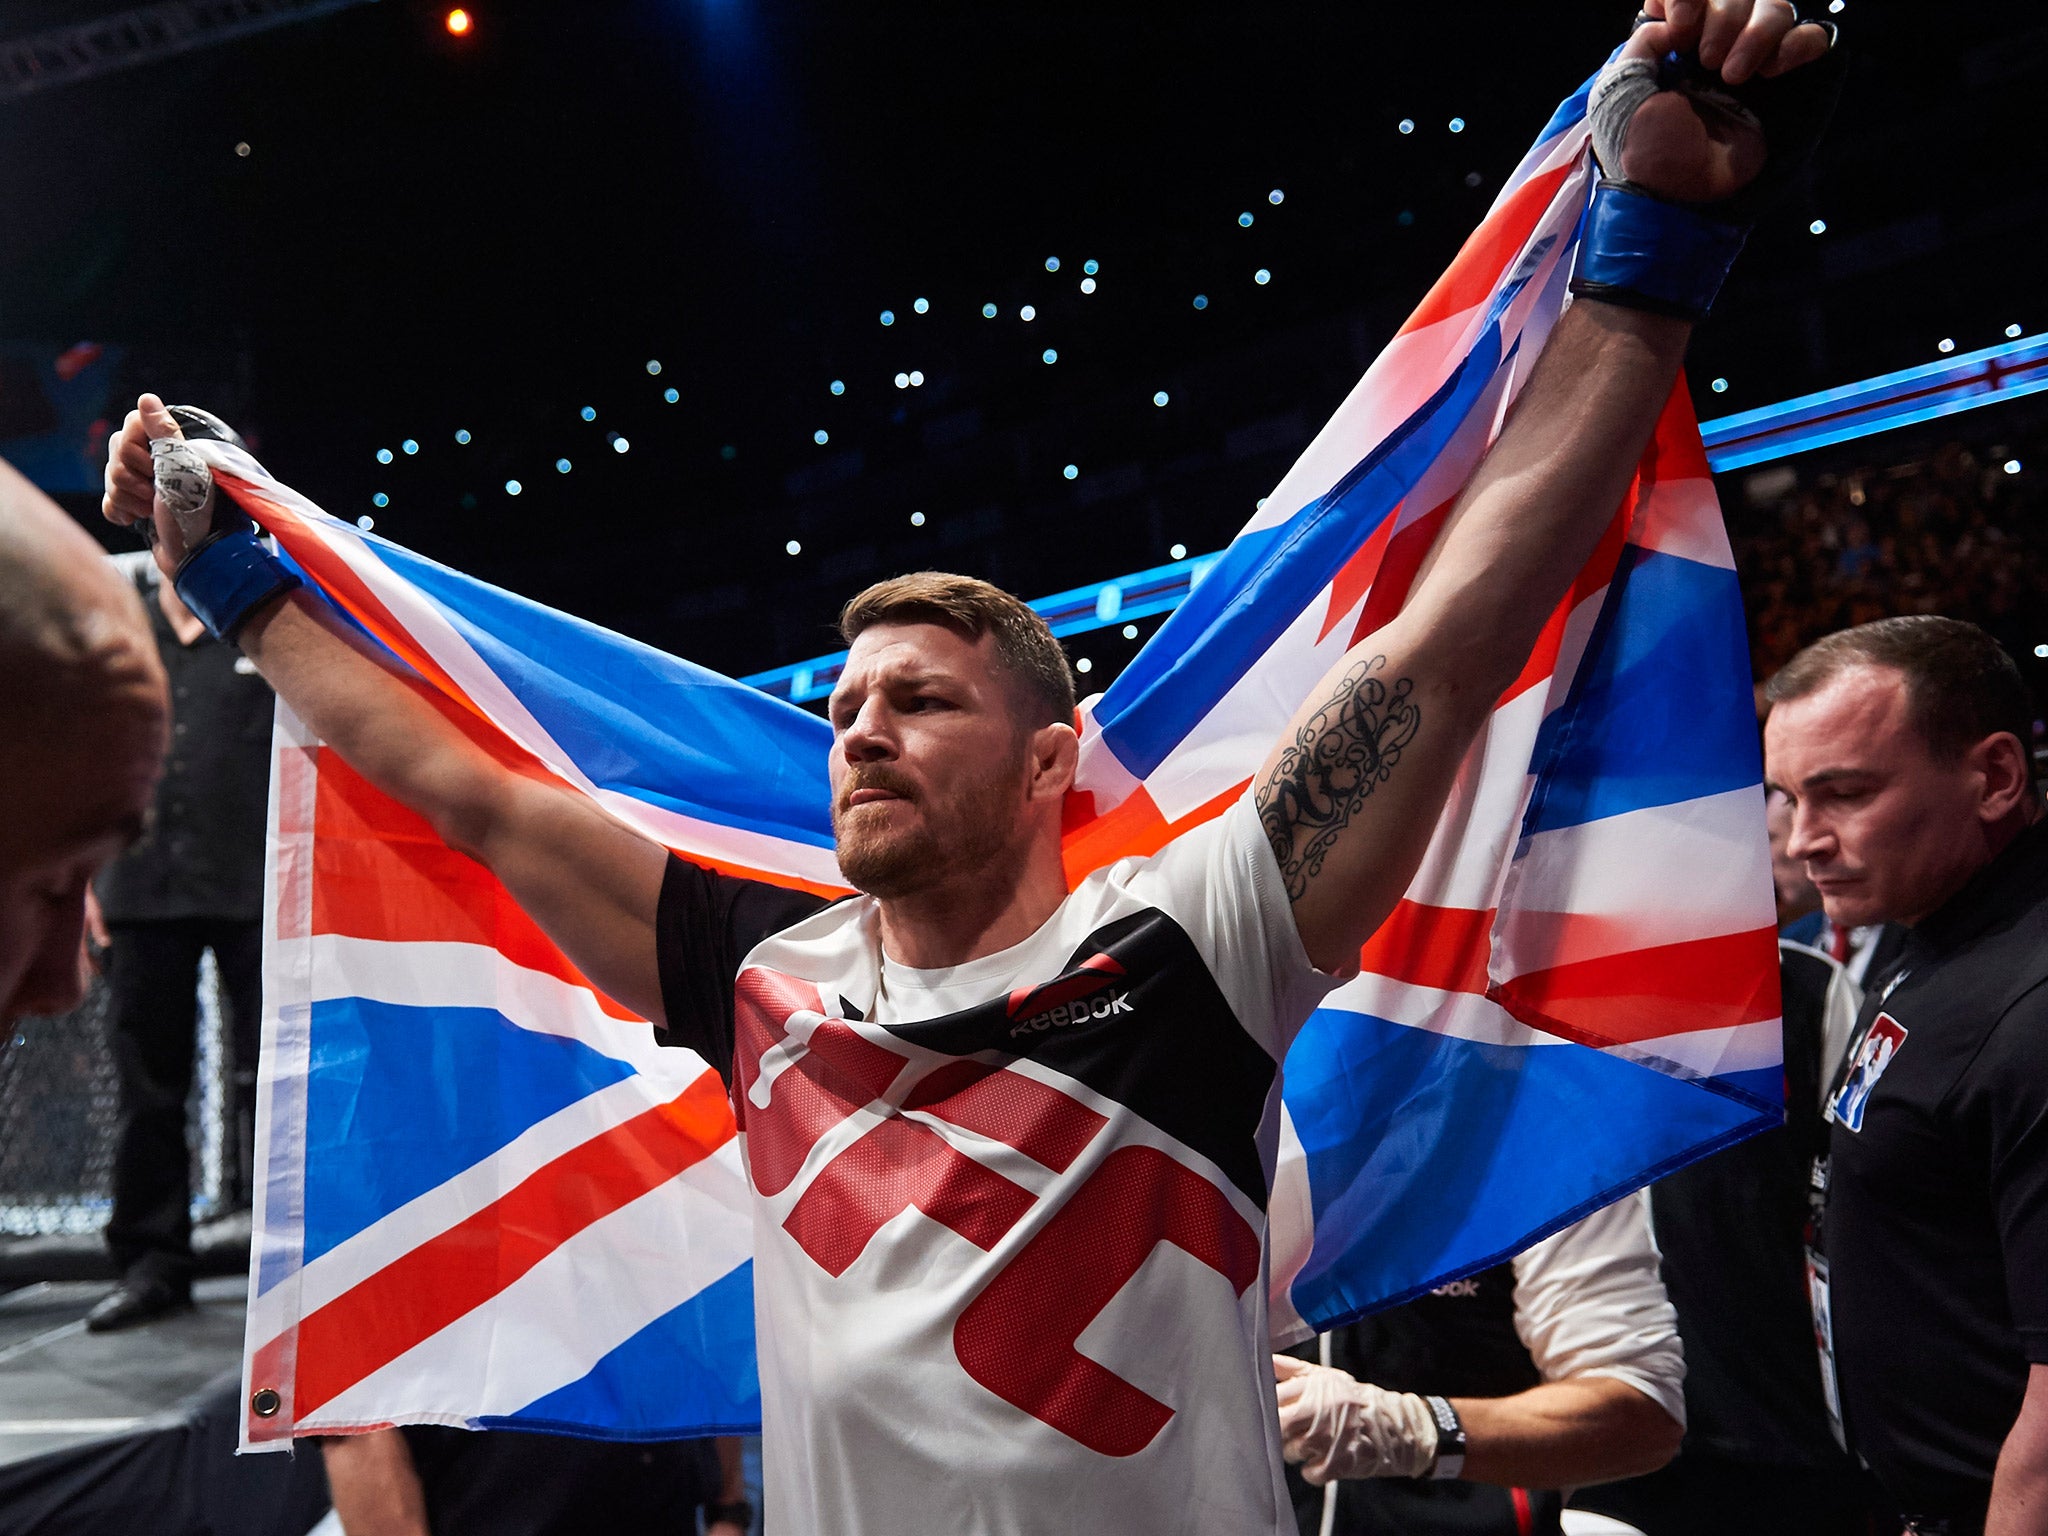 Michael Bisping replaces Chris Weidman to fight Luke Rockhold at UFC 199